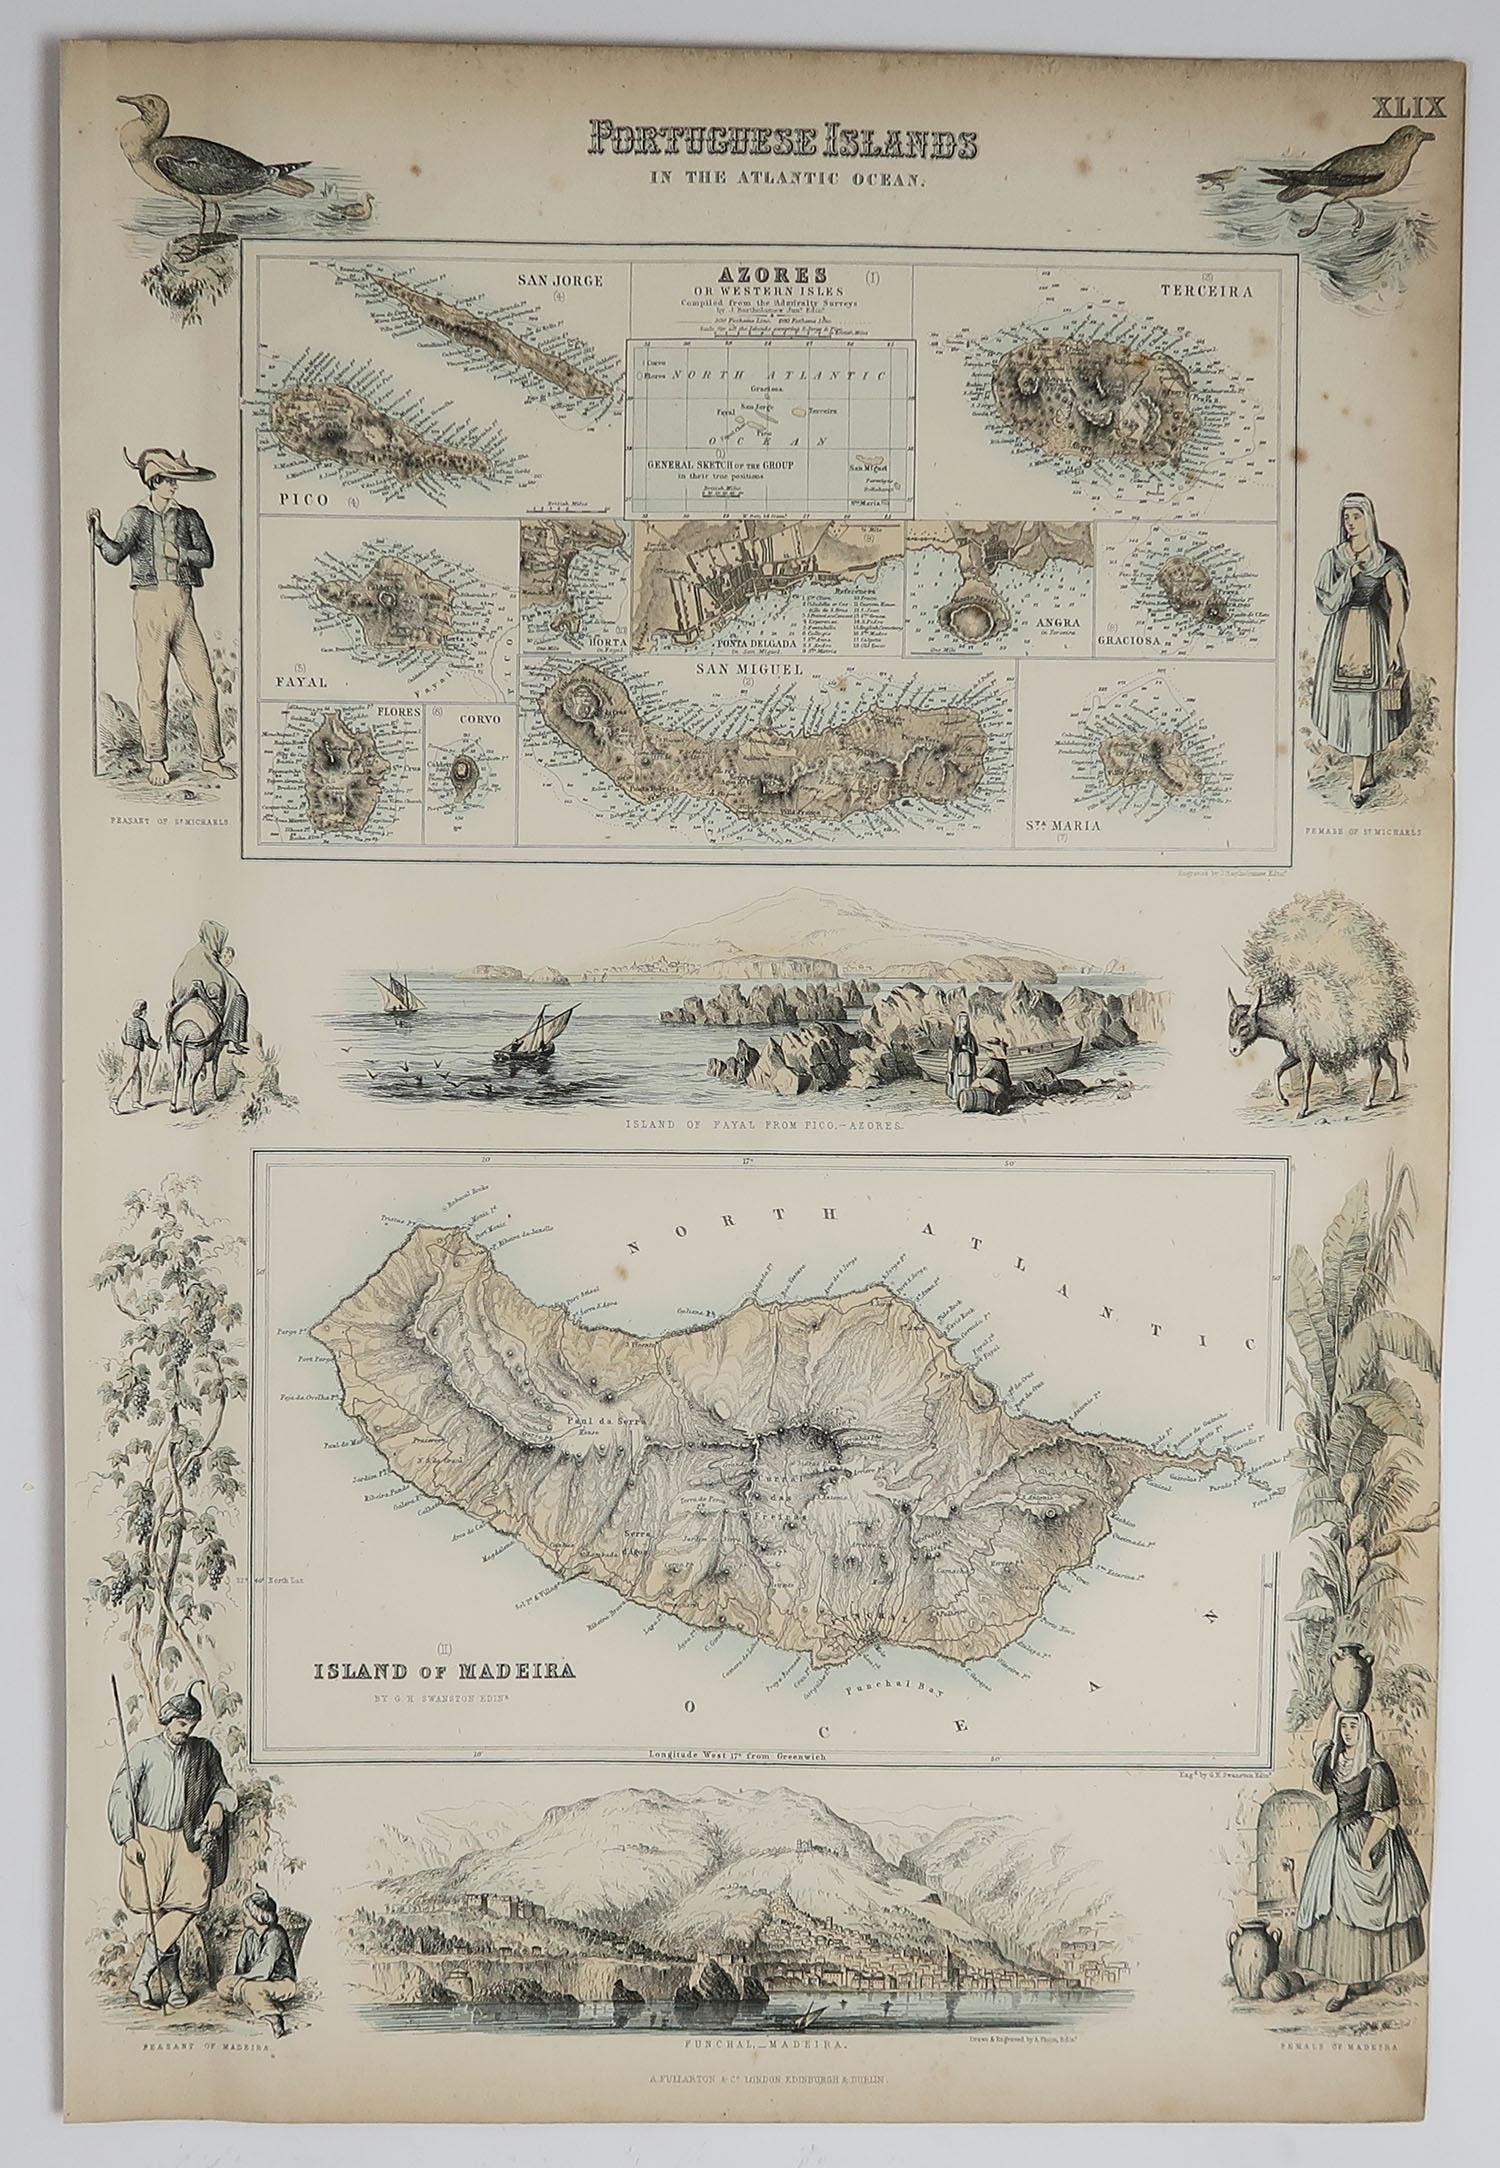 Great map of Madeira and The Azores

Wonderful figural border

From the celebrated Royal Illustrated Atlas

Lithograph. Original color. 

Published by Fullarton, Edinburgh. C.1870

Unframed.












 